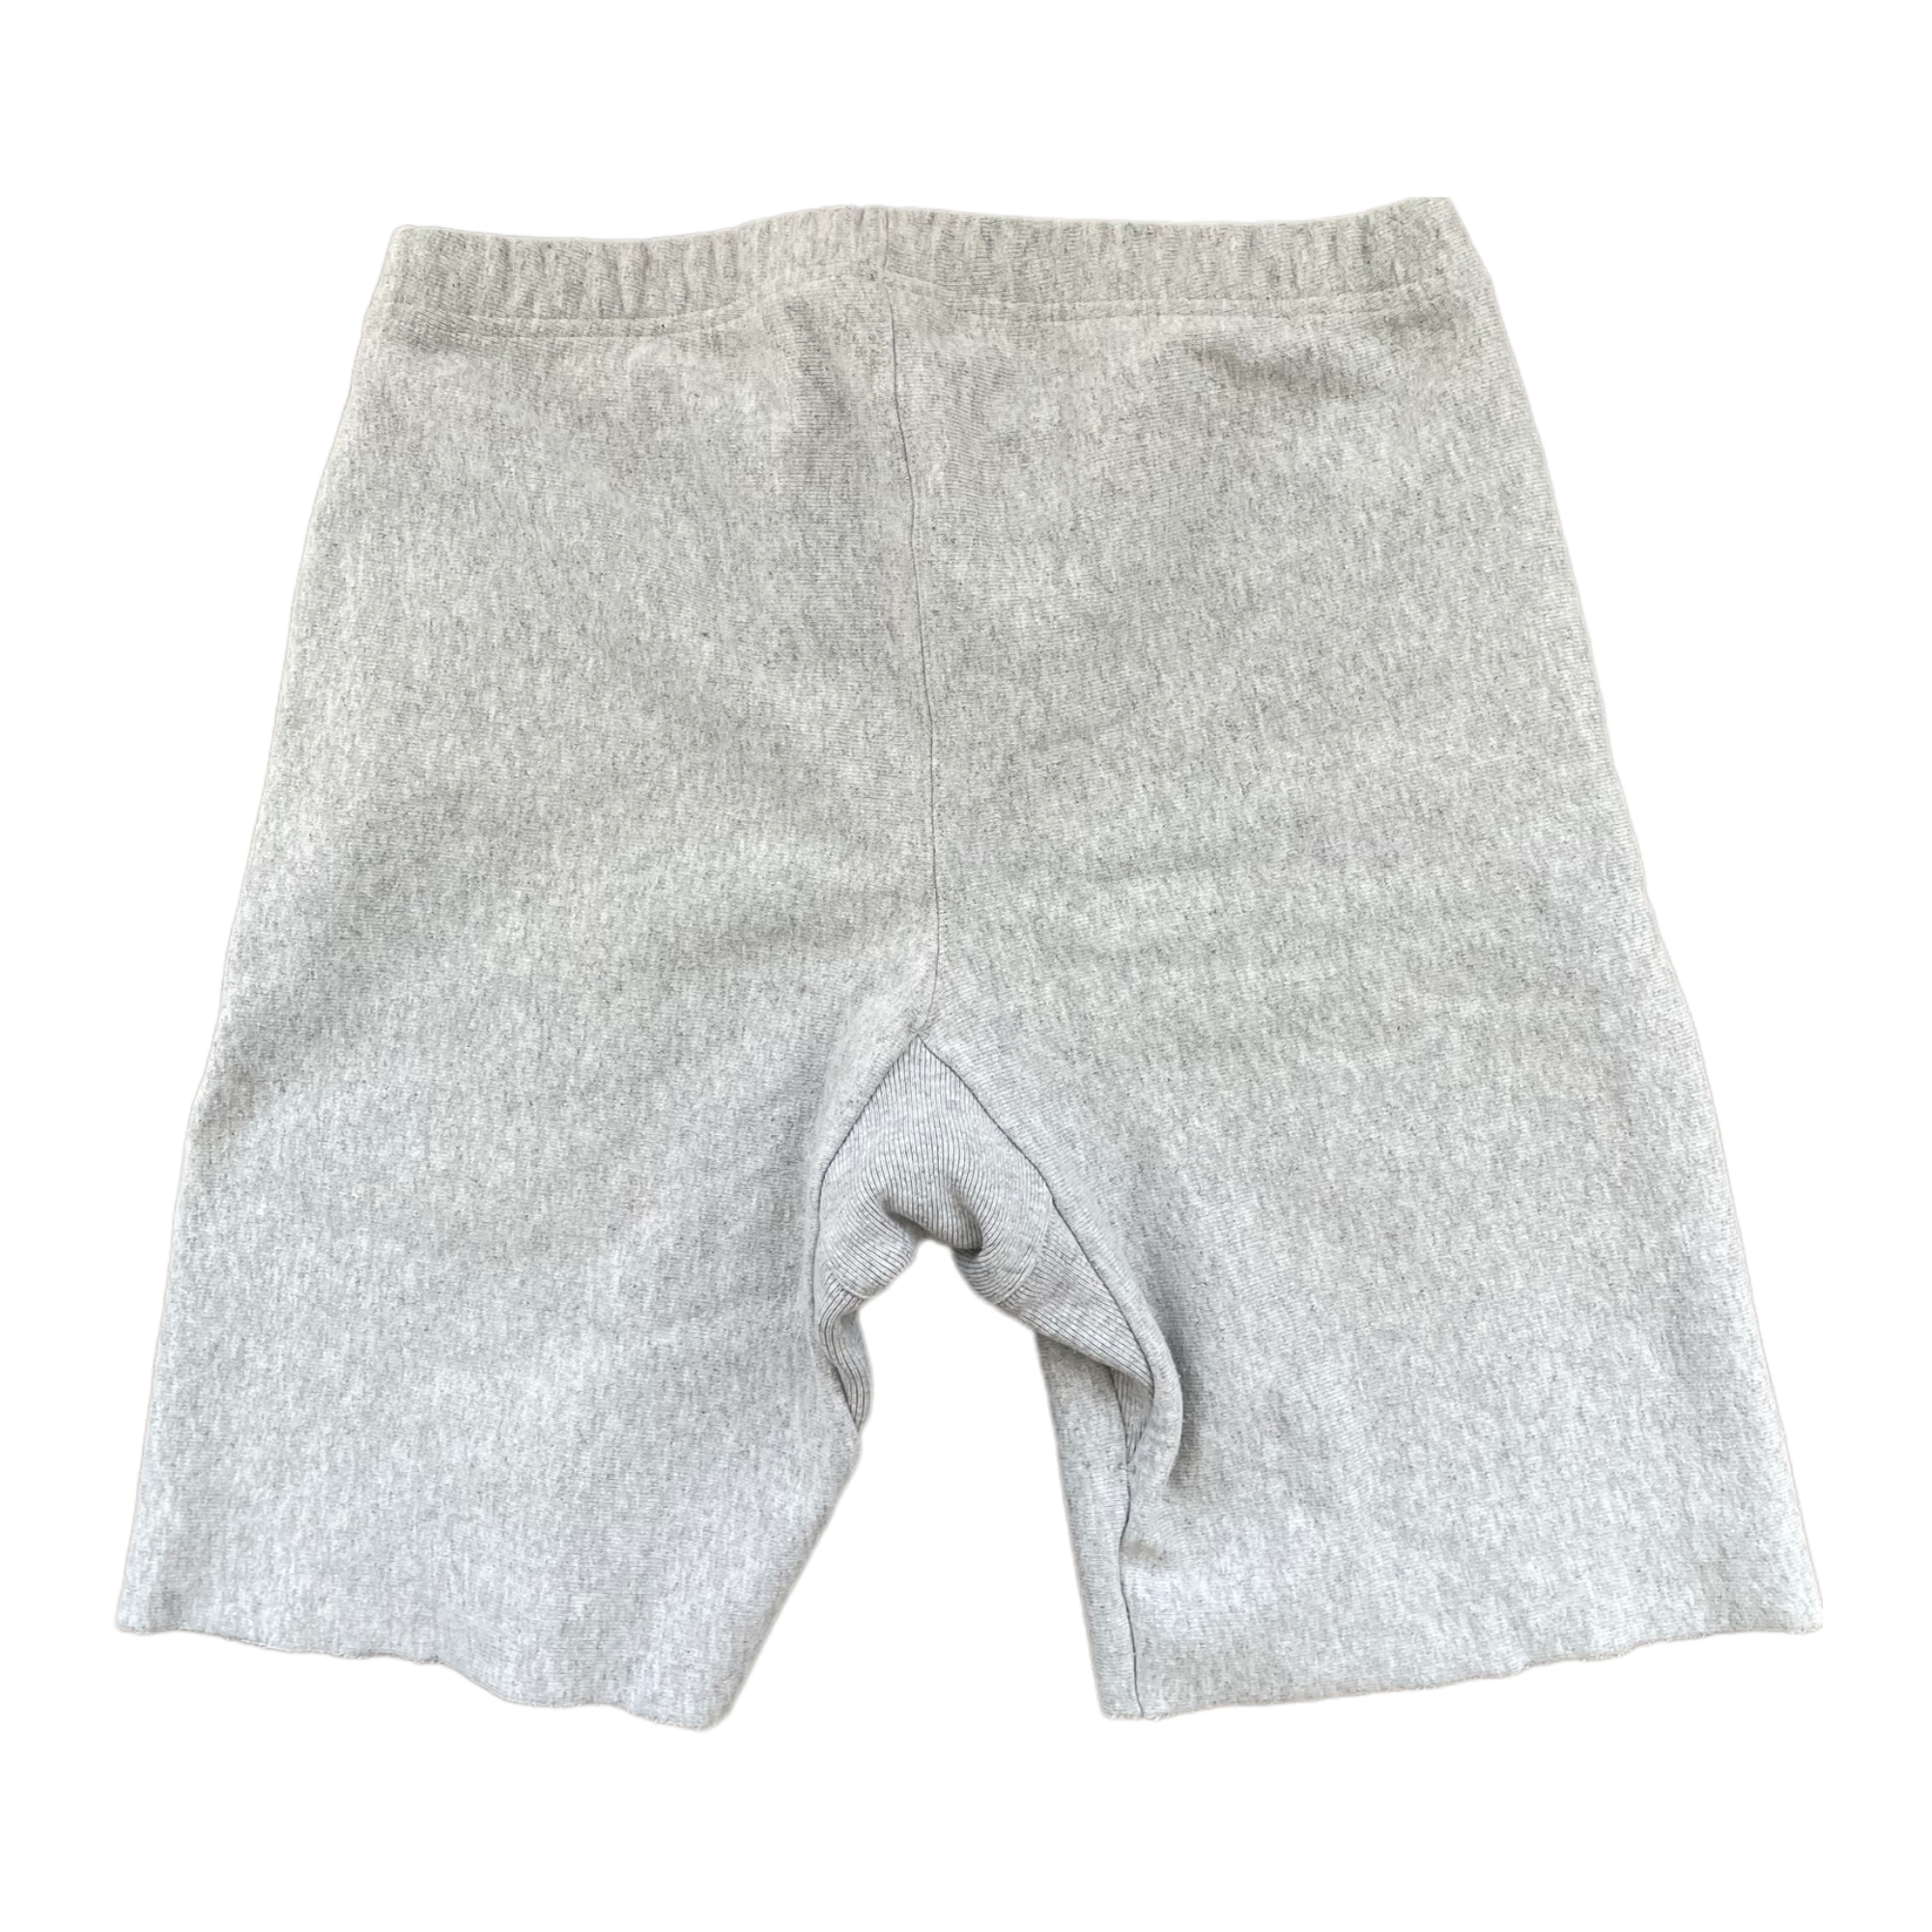 Early 80s Cut-off Champion Reverse Weave Shorts - Heather Grey - S